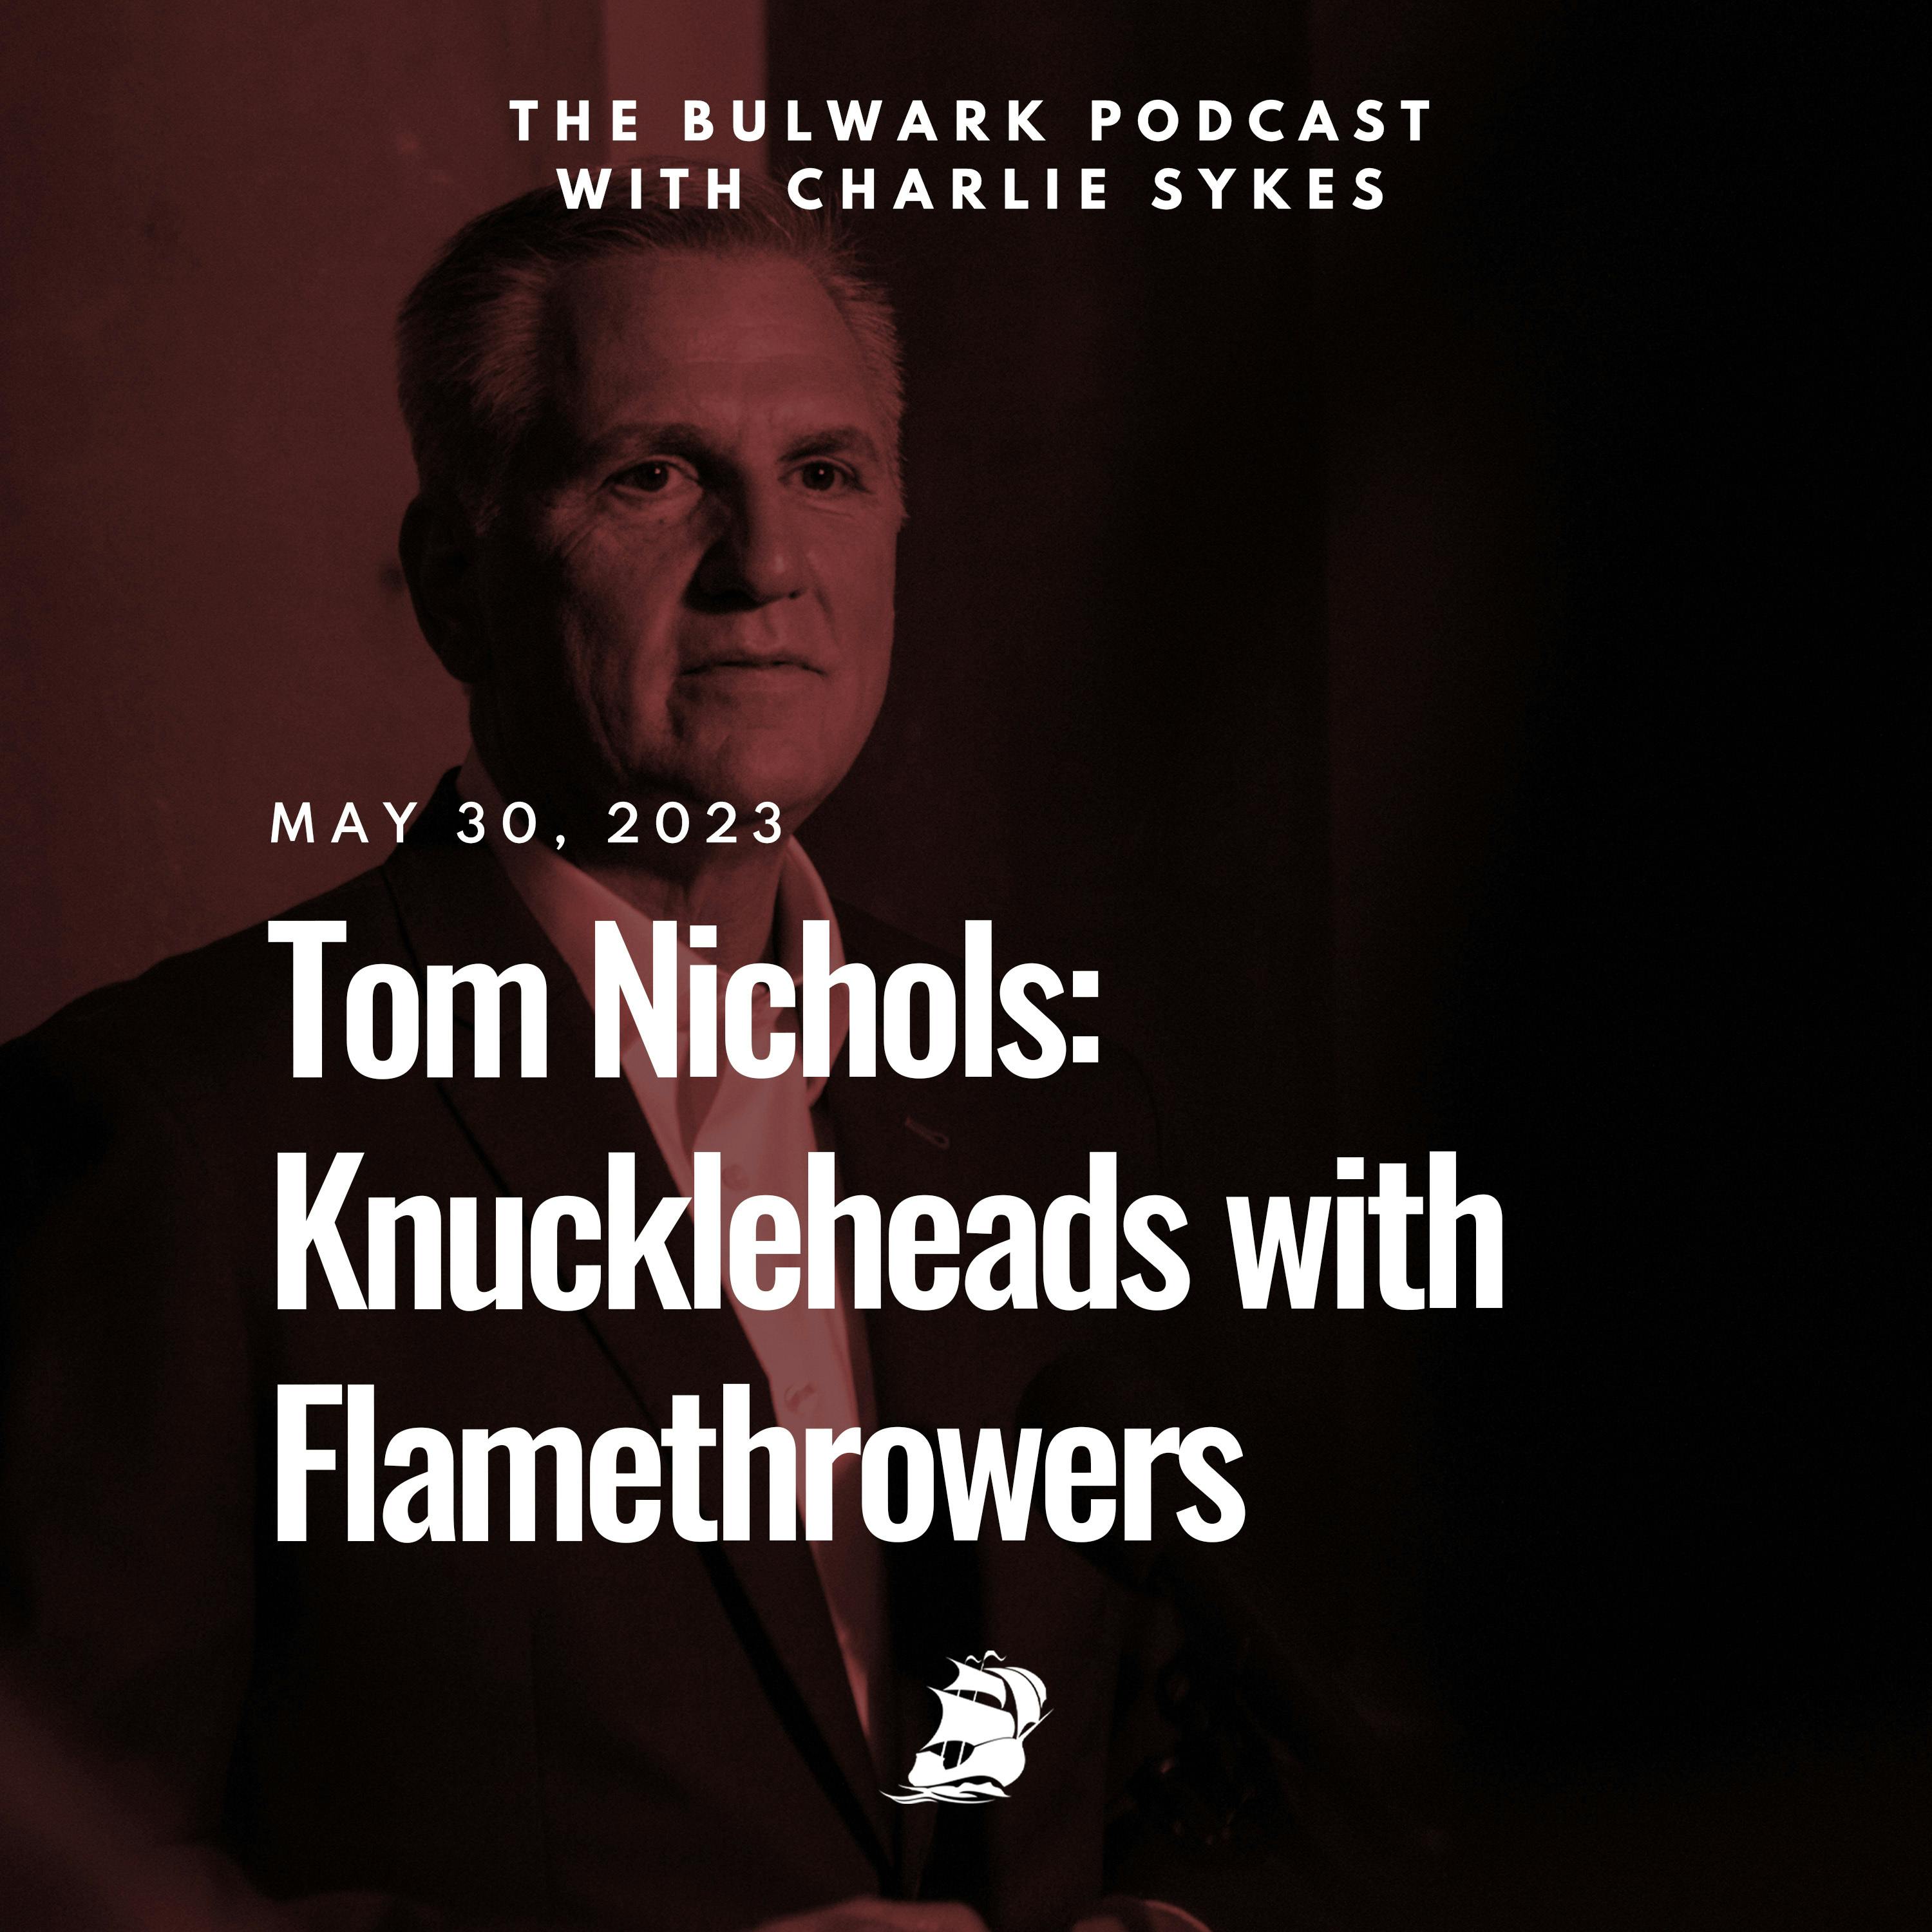 Tom Nichols: Knuckleheads with Flamethrowers